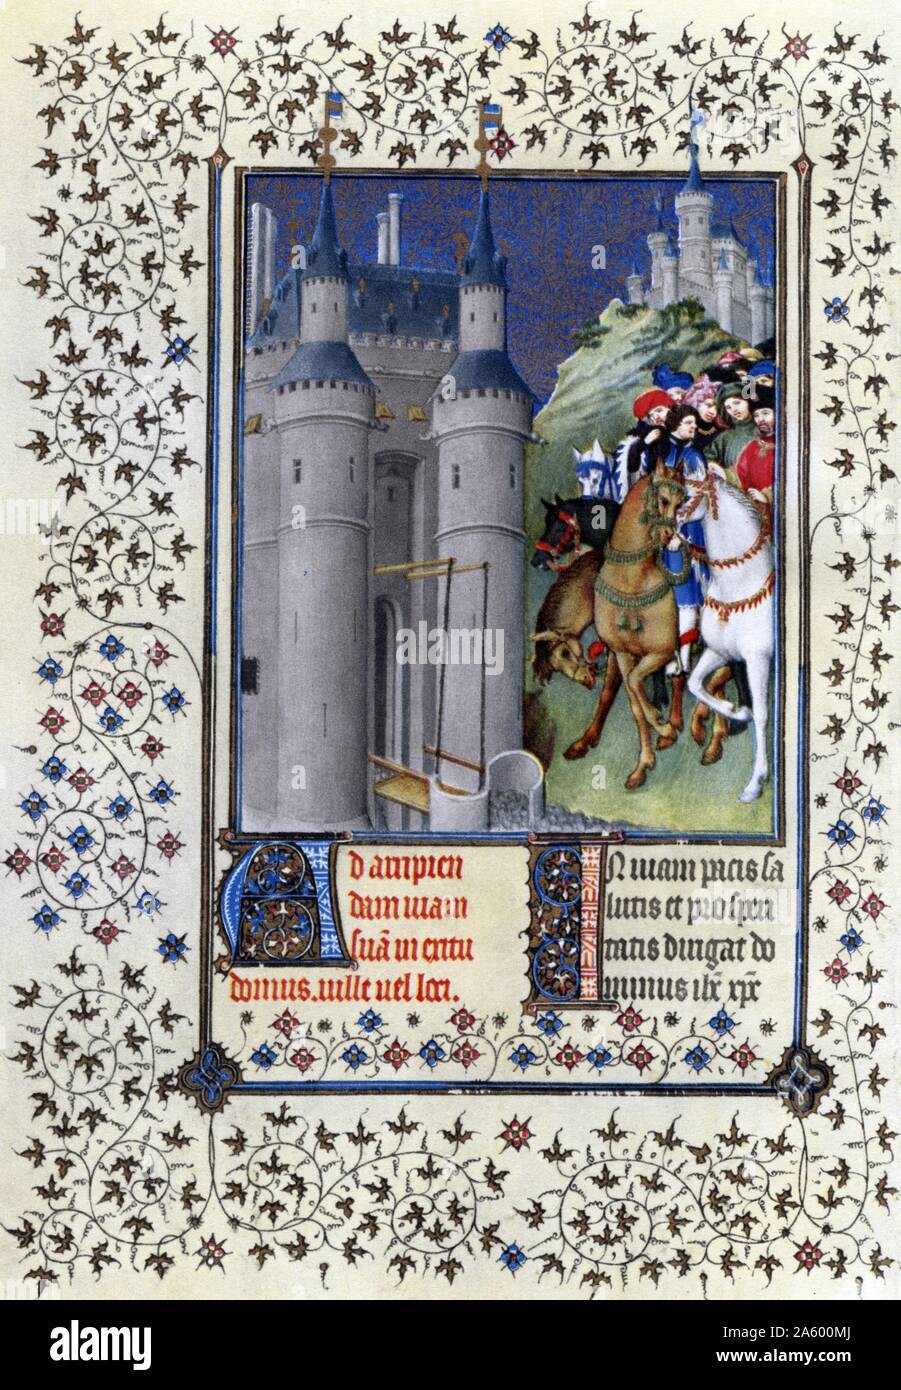 Illumination depicting Duc de Berry on a Journey from the Belles Heures of Jean de France, Duc de Berry (The Beautiful Hours) an early 15th-century illuminated manuscript book of hours. Dated 15th Century Stock Photo